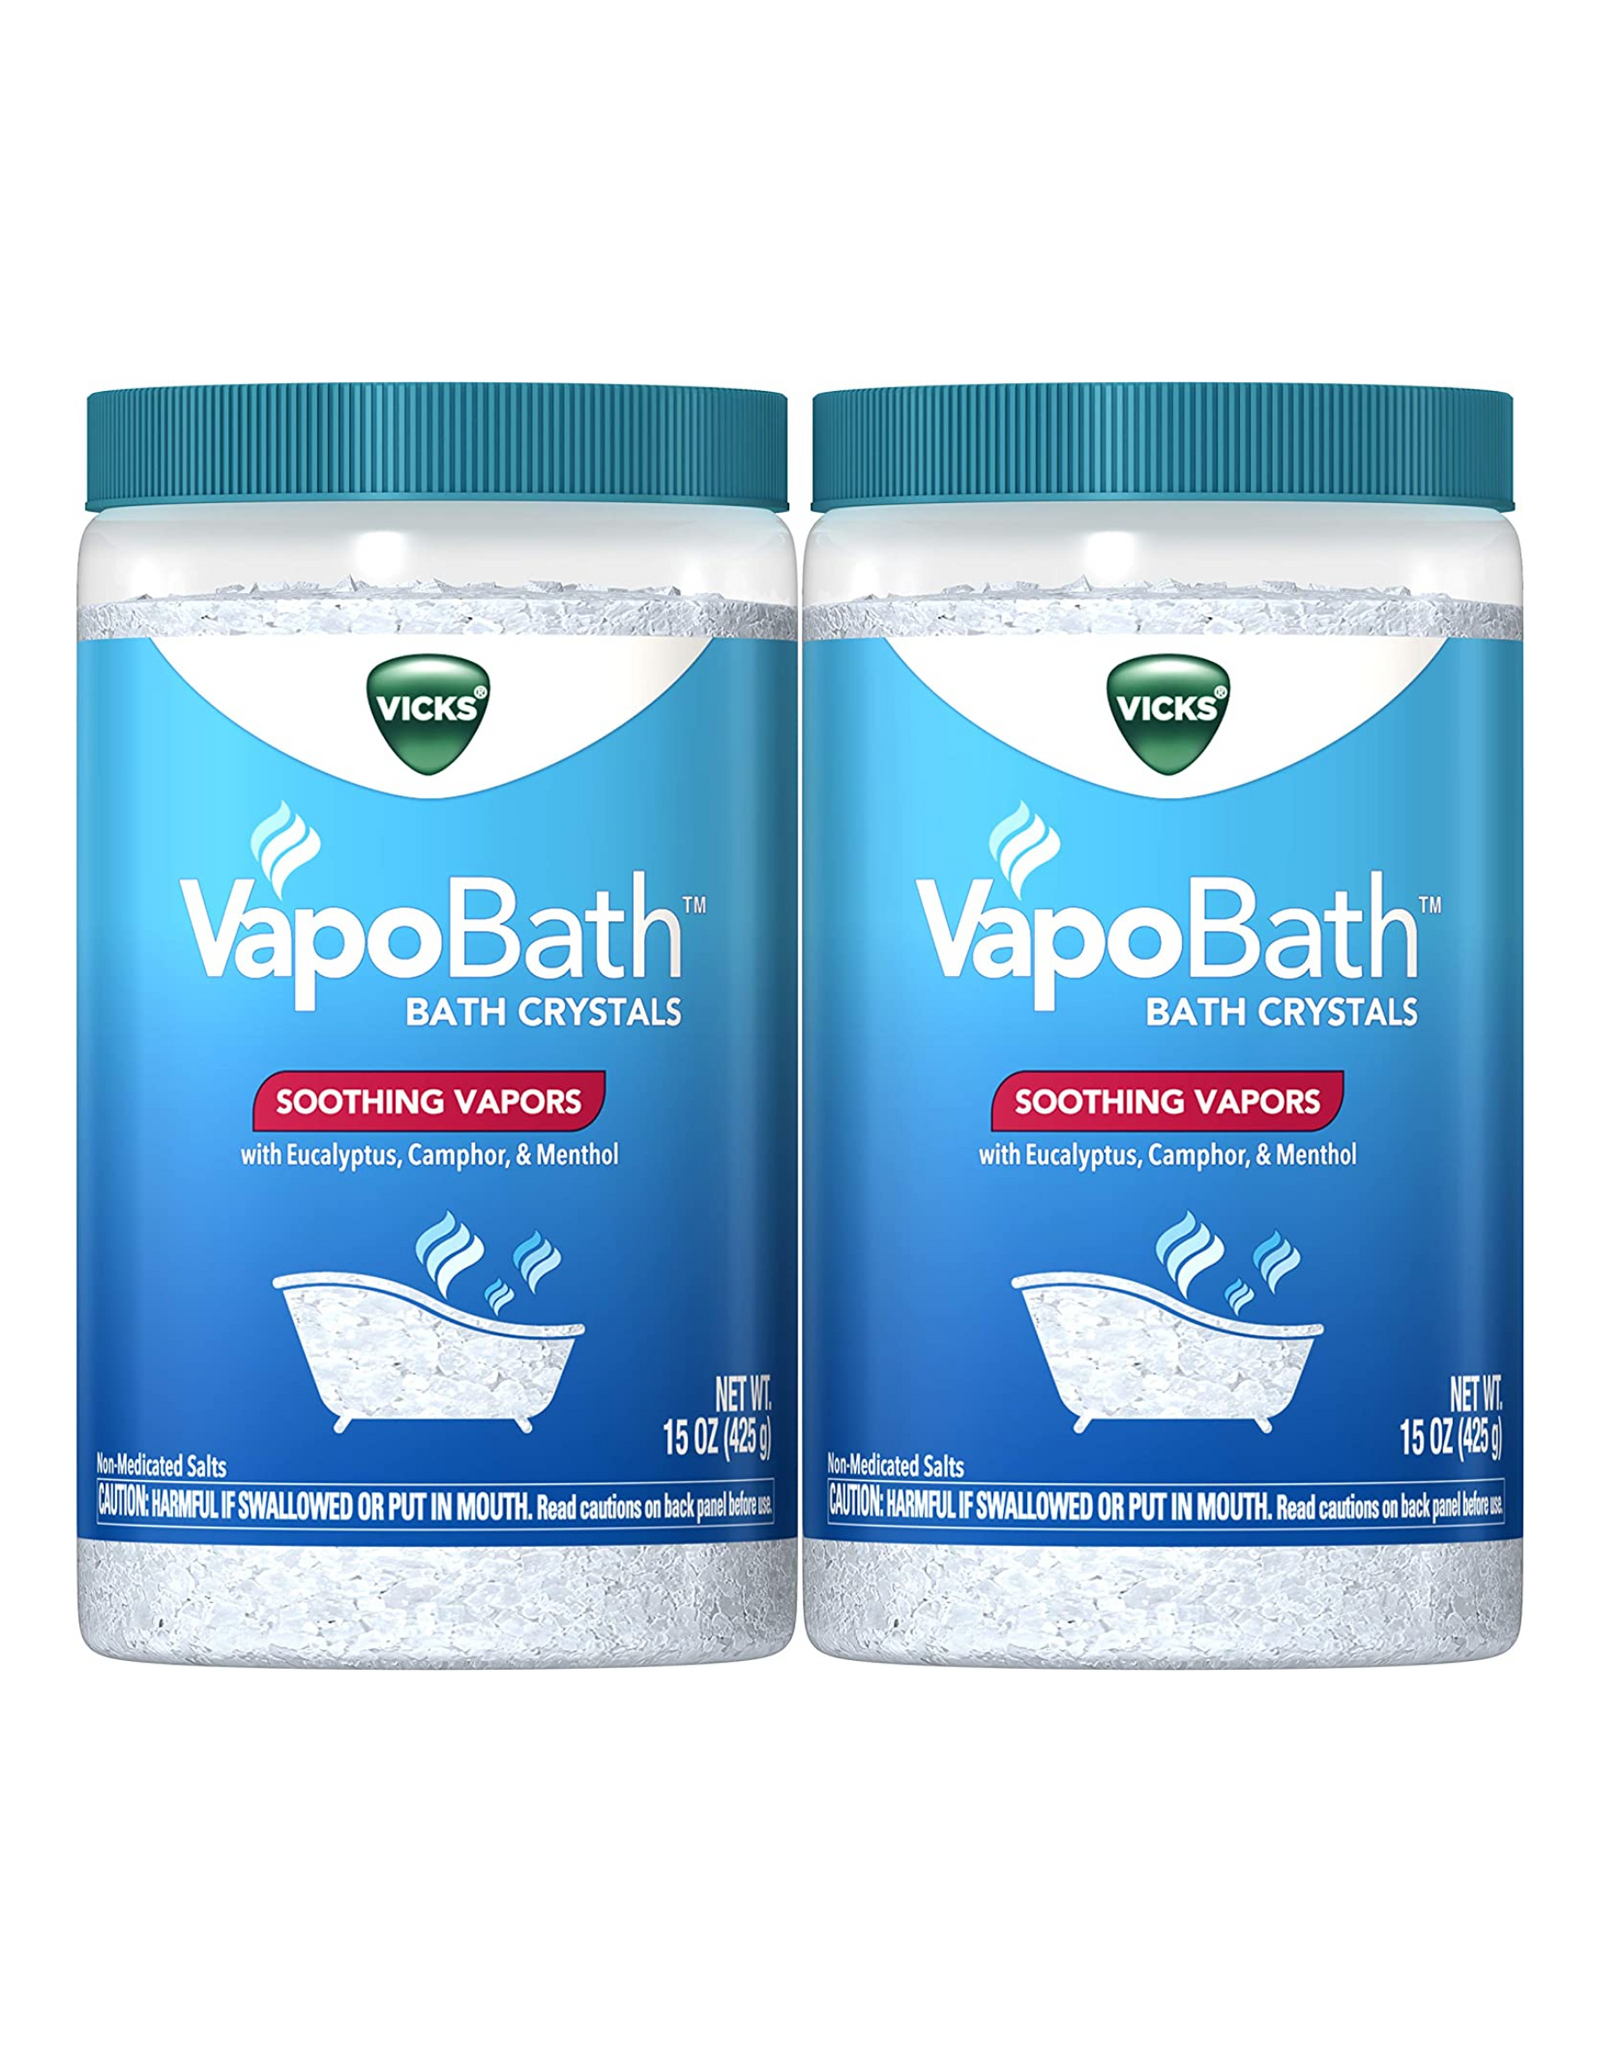 Vicks VapoBath Canisters, Soothing Vapors, 15 oz, Pack of 2